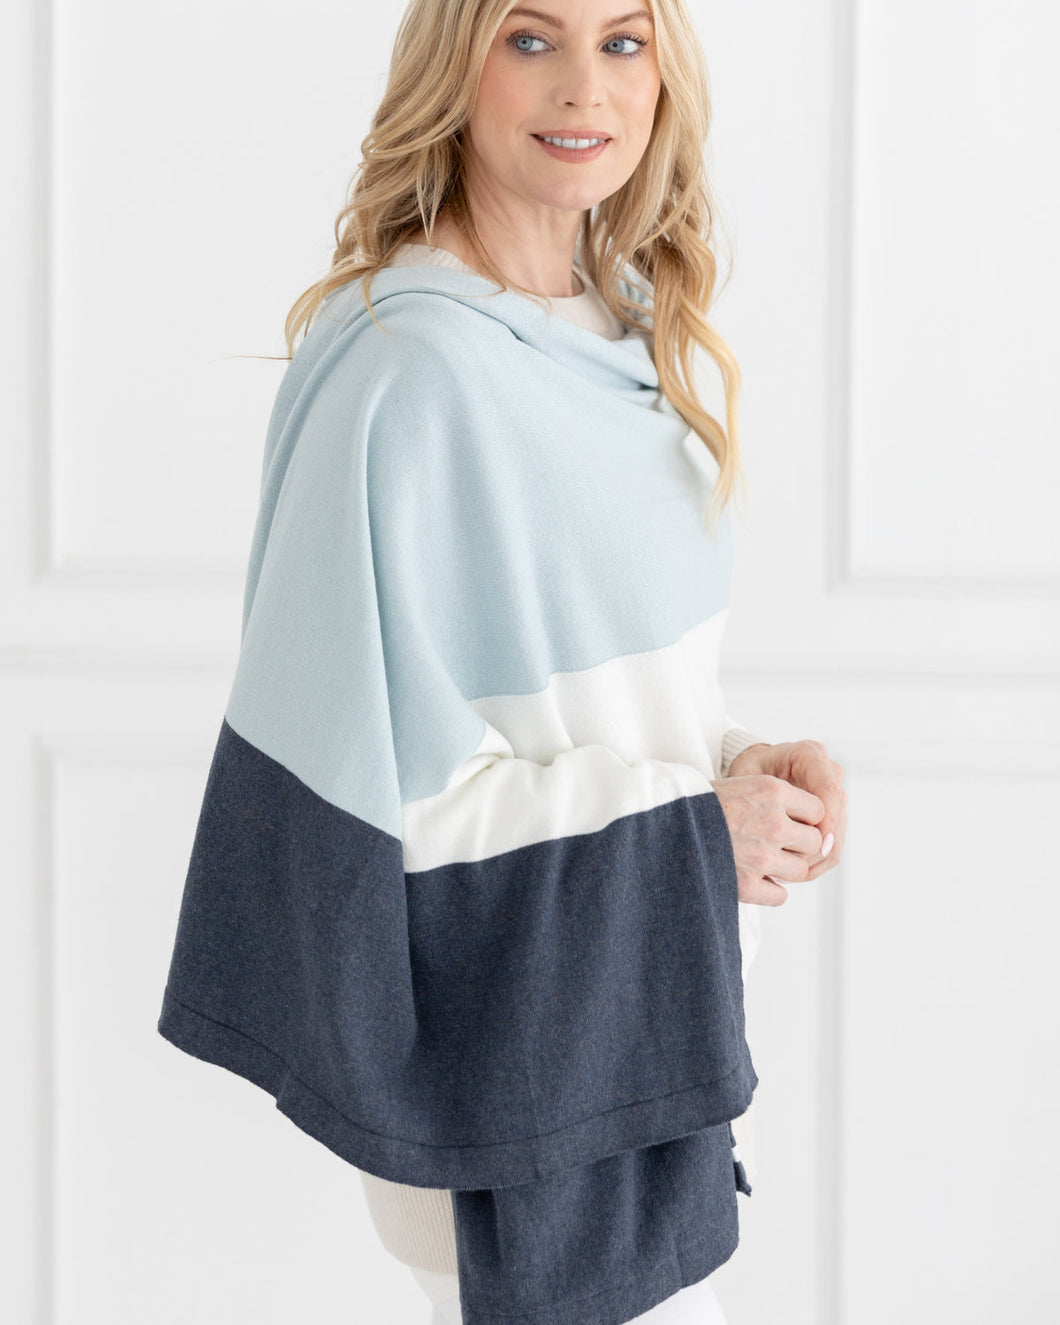 The Dreamsoft Travel Scarf - Sky Blue Colorblock